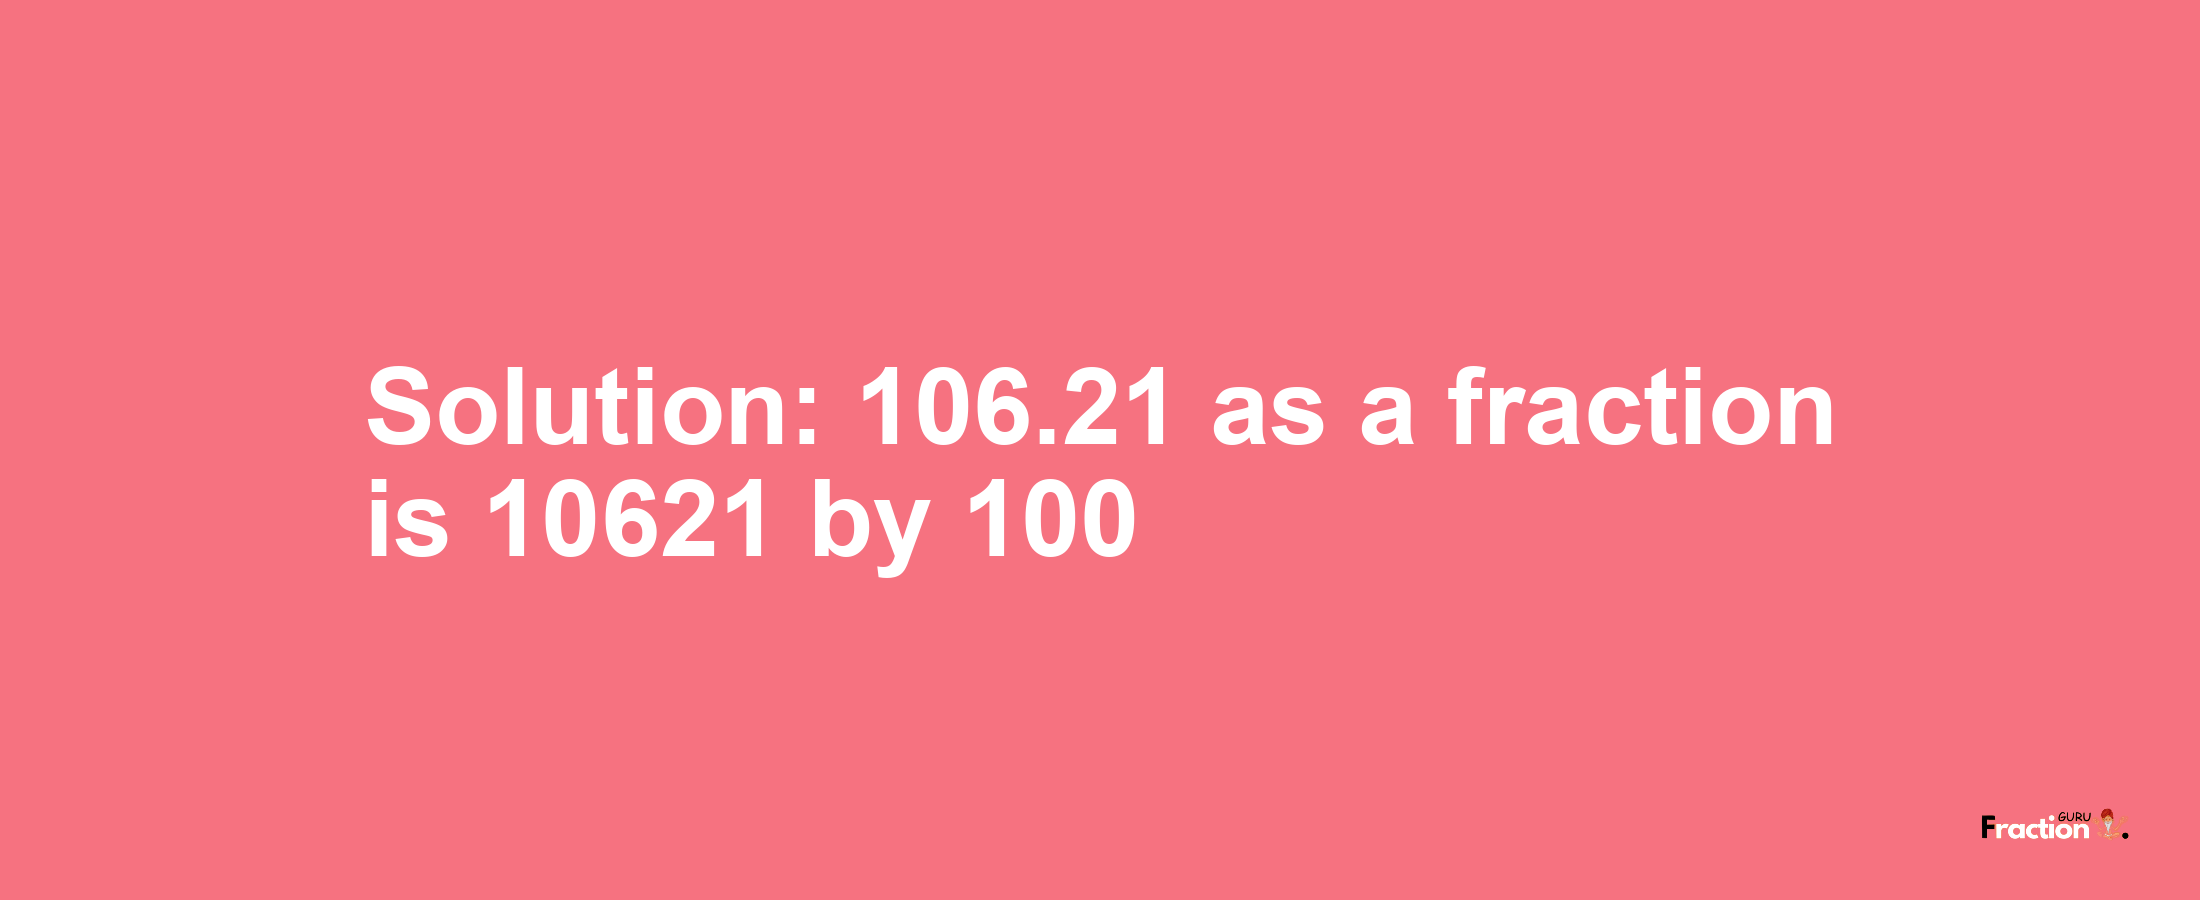 Solution:106.21 as a fraction is 10621/100